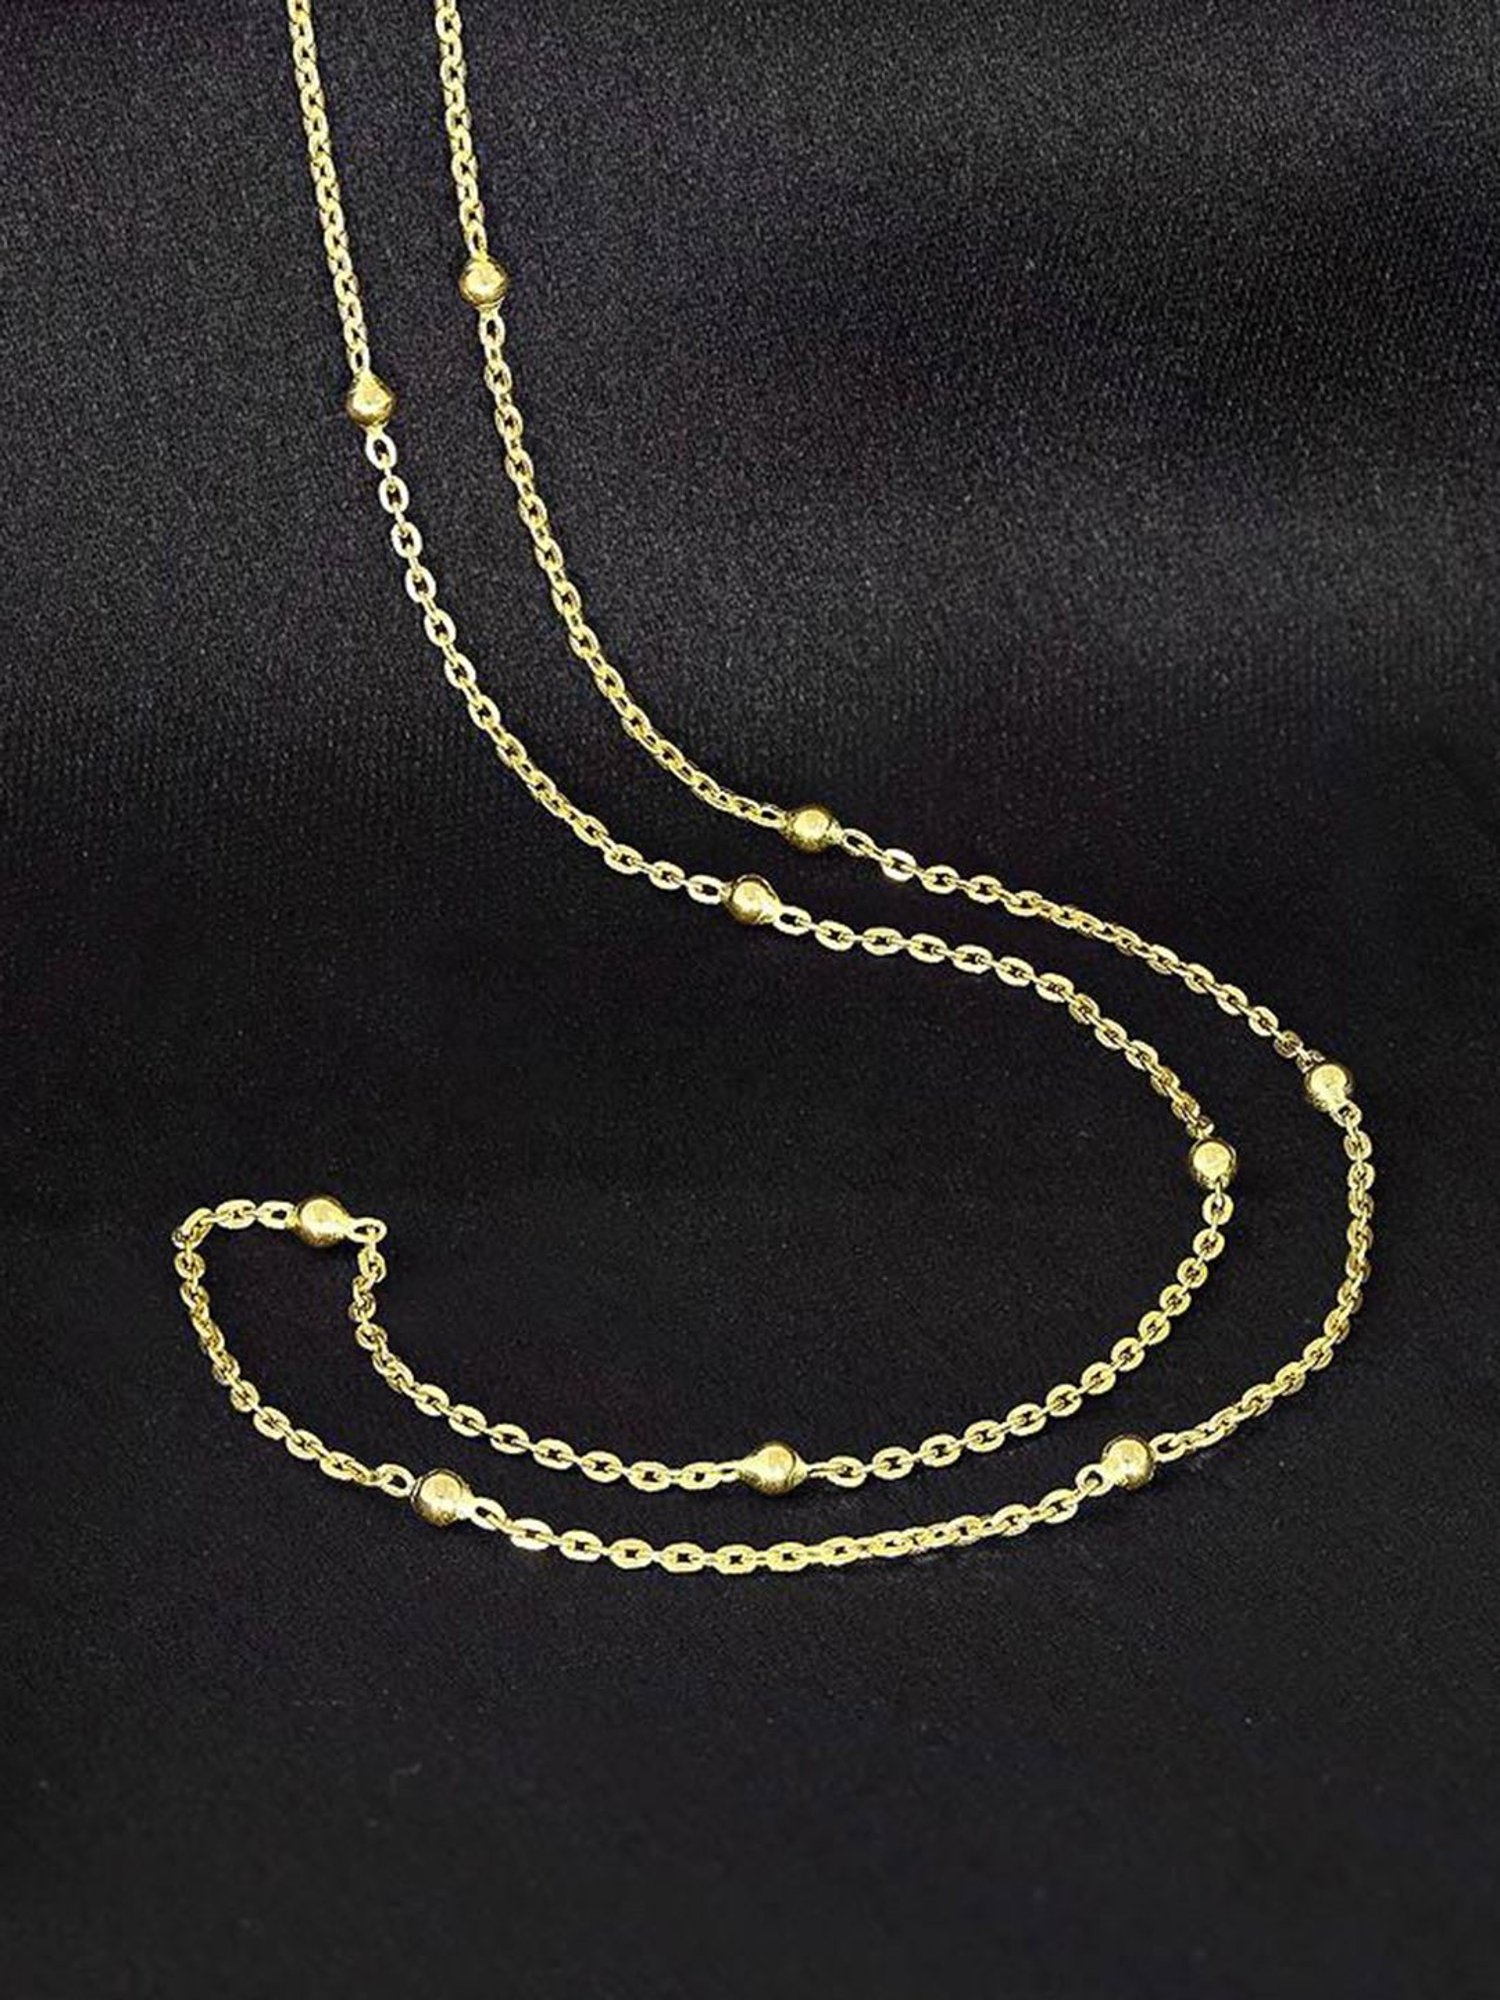 22K Real Gold Chains for Men at Affordable Price - Candere by Kalyan  Jewellers